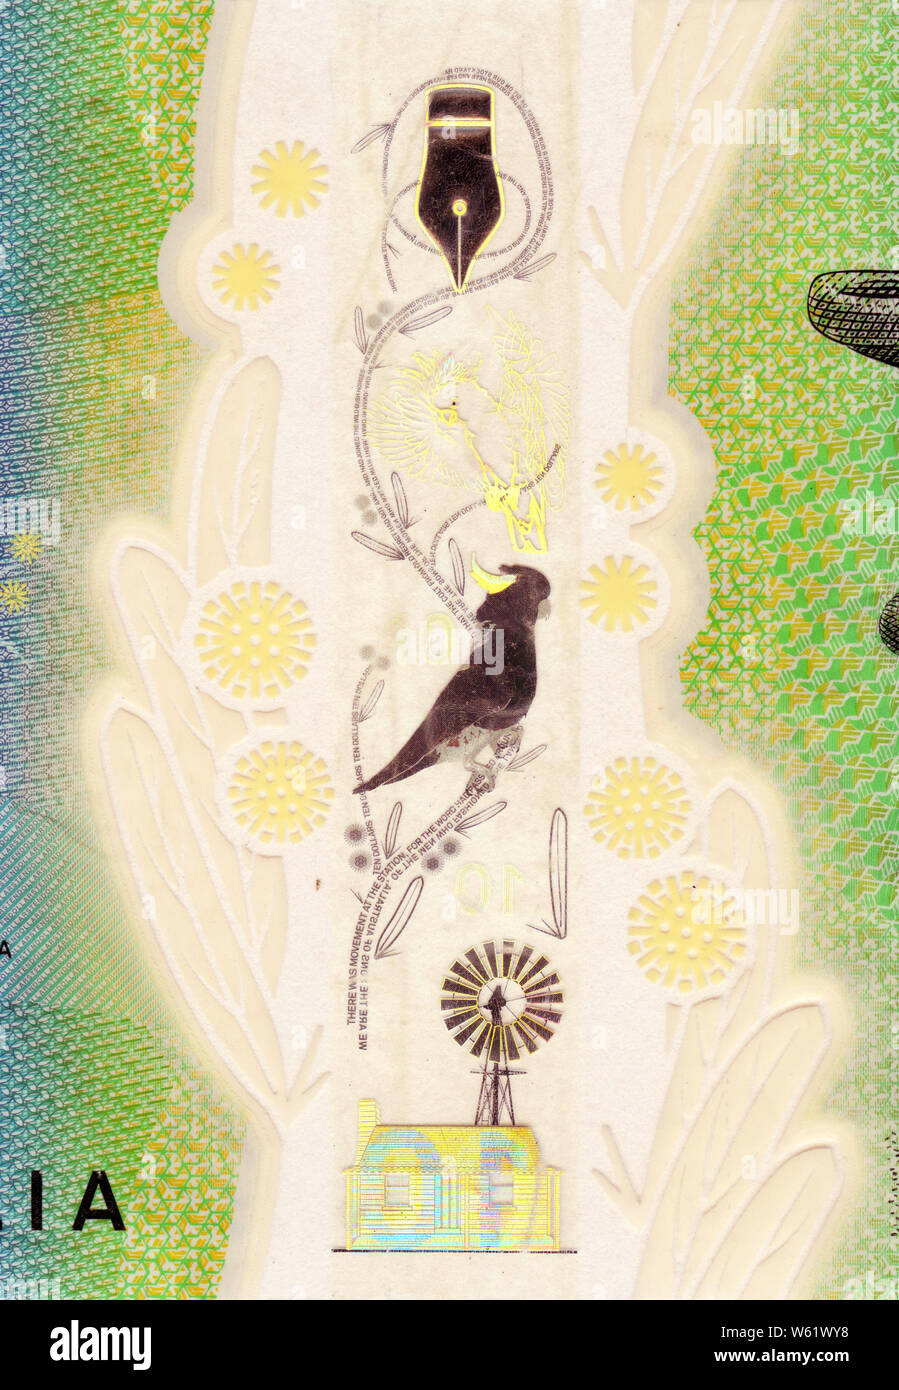 The security window from the Australian 10 dollar note featuring elements of Banjo Paterson's poem, The Man from Snowy River Stock Photo